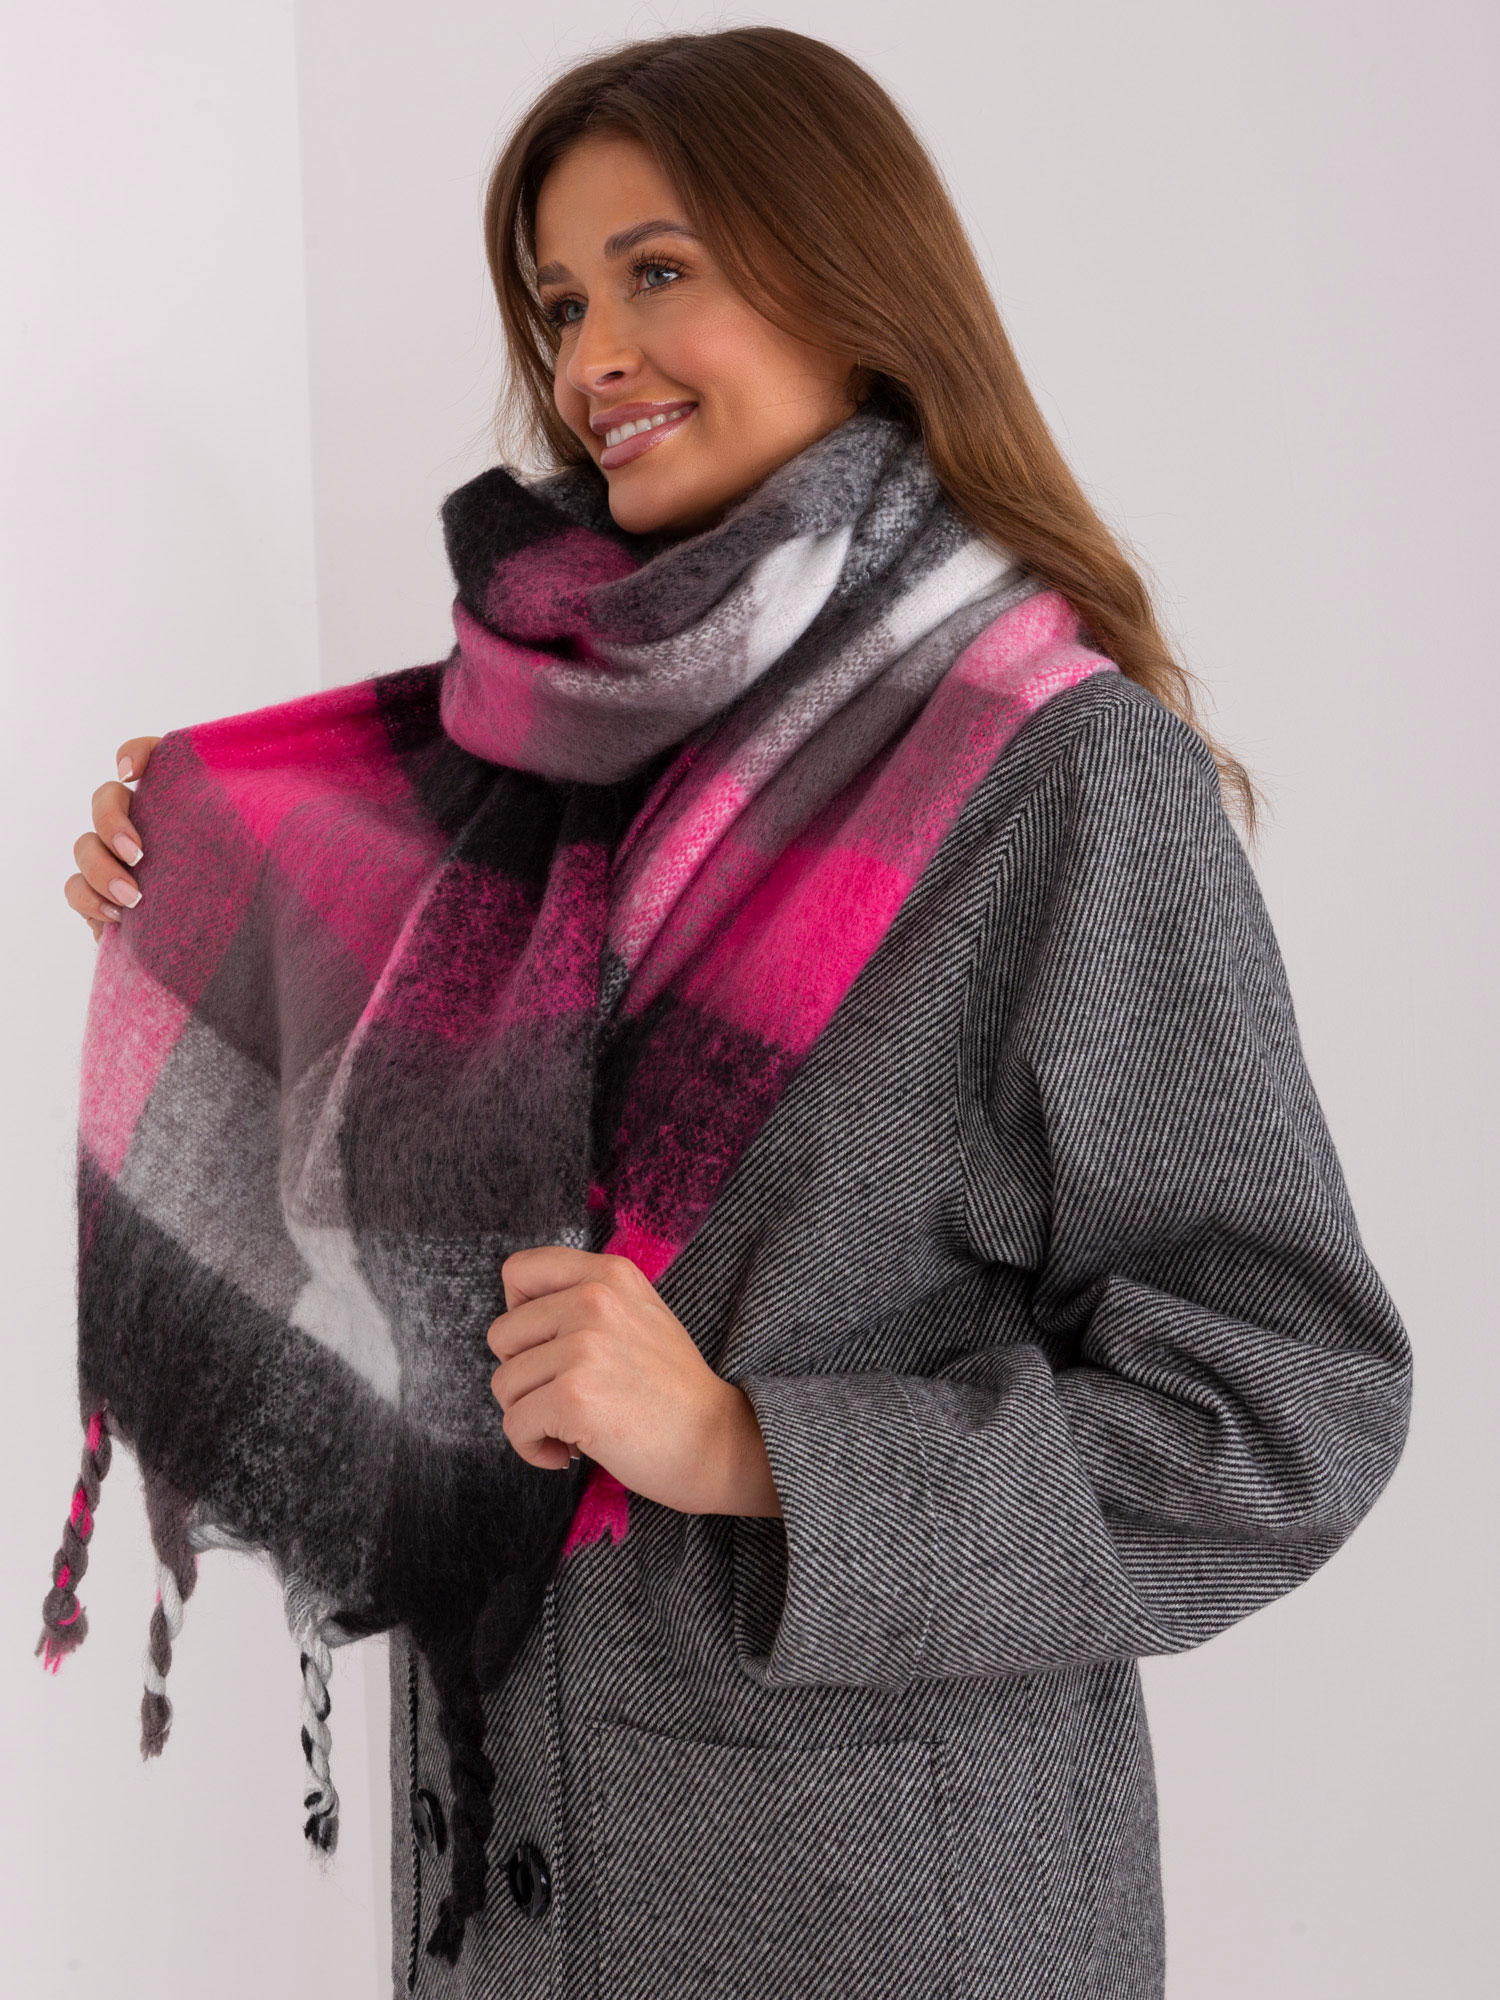 Pink and black long women's scarf